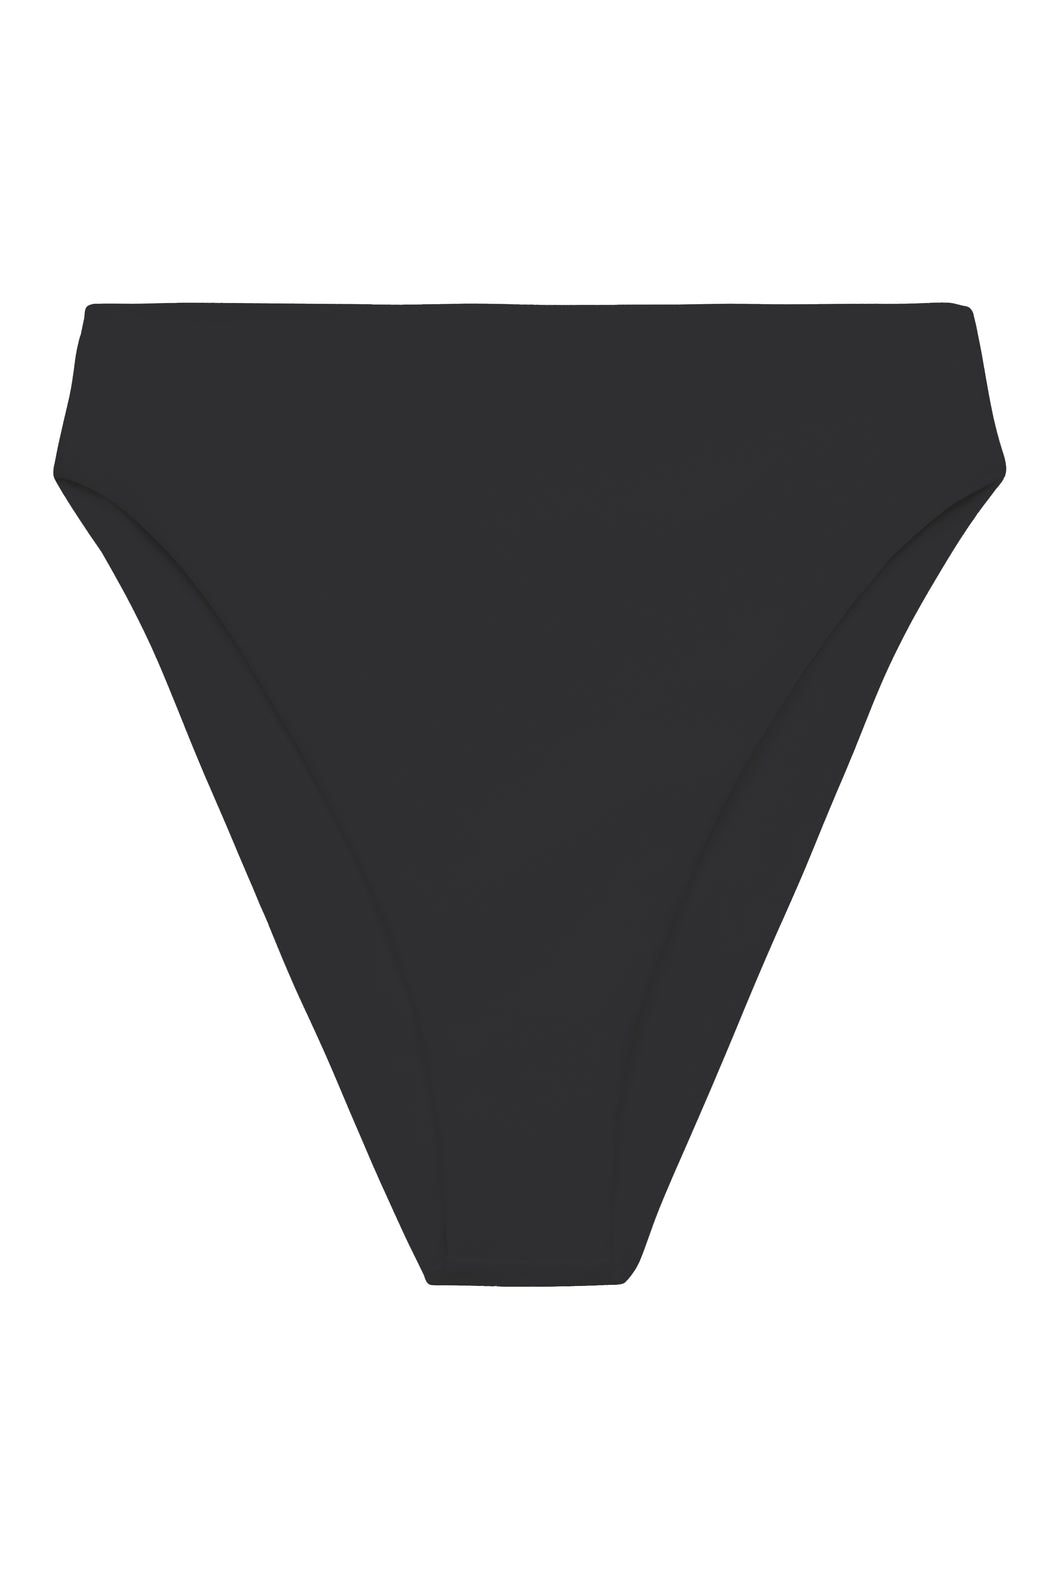 Flat image of the Incline Bottom in black